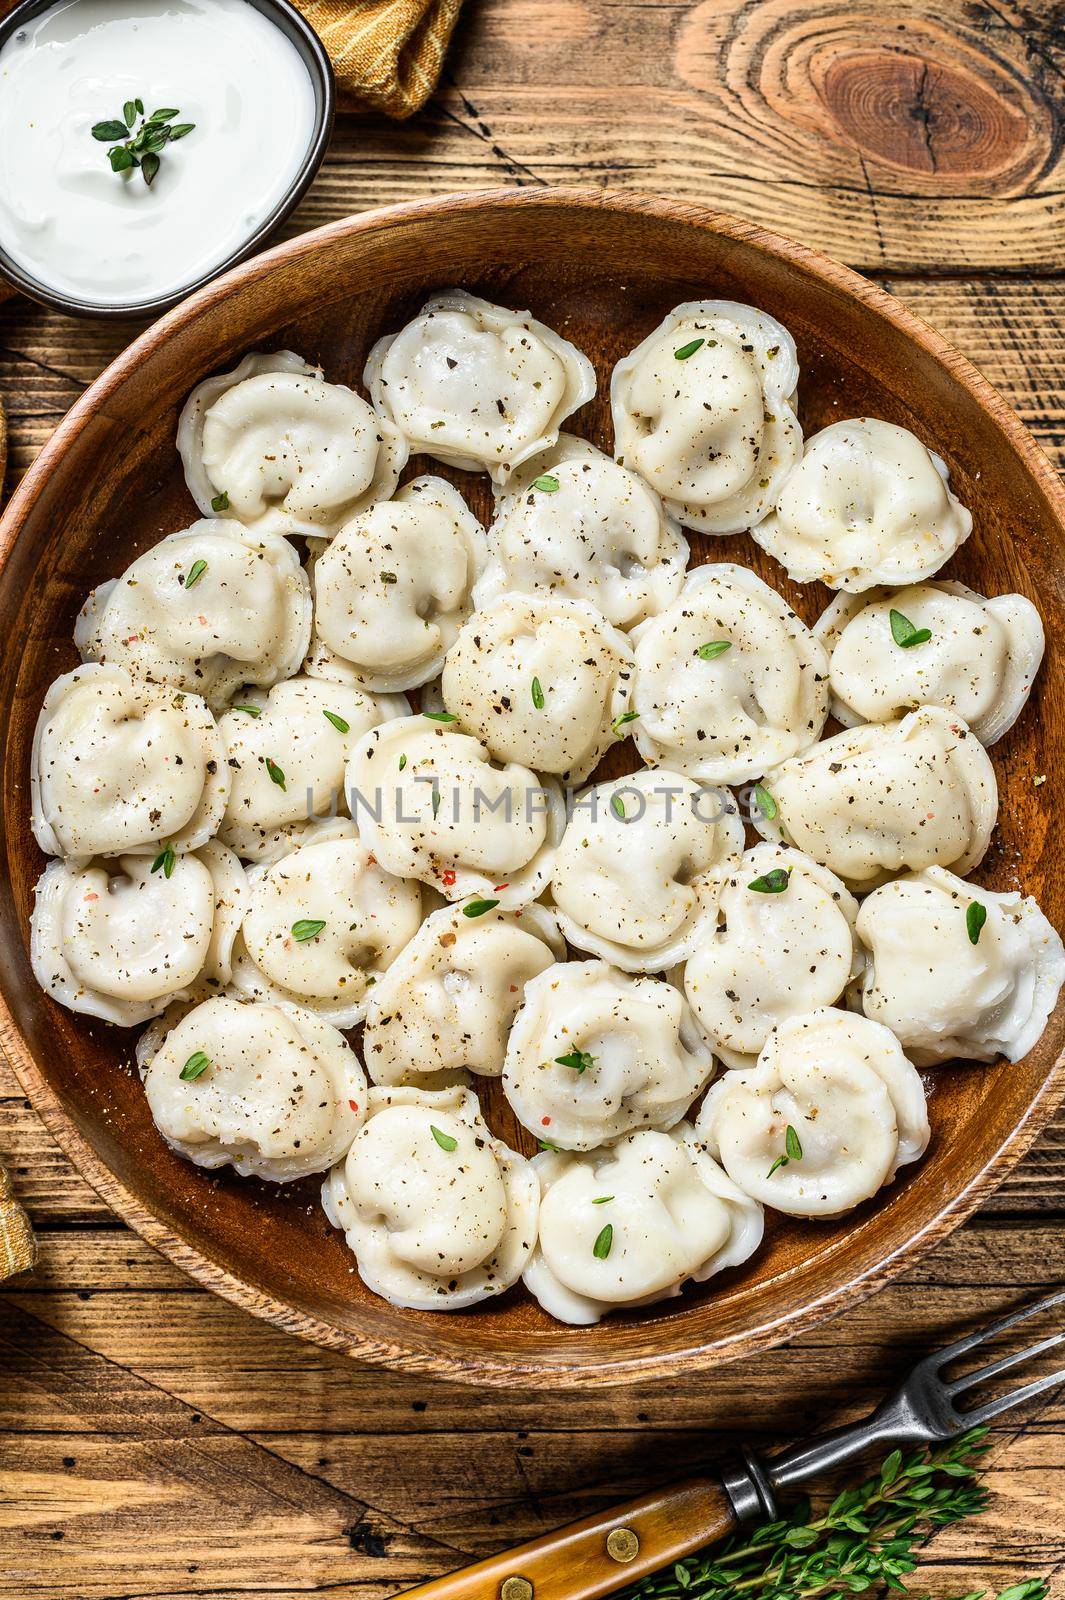 Homemade Russian Dumplings Pelmeni with beef and pork meat in a wooden bowl. wooden background. top view.